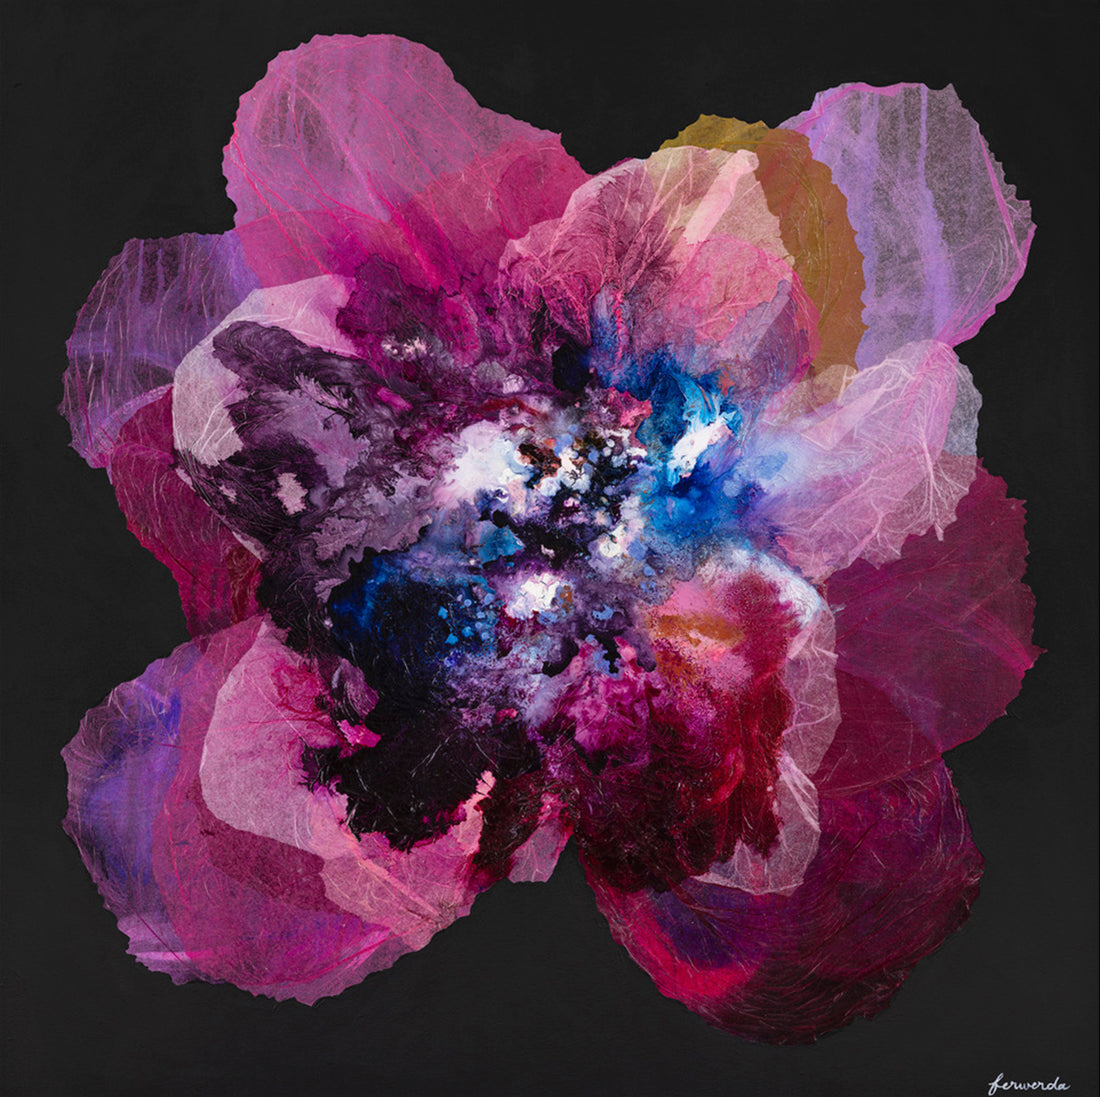 Antoinette Ferwerda | Prussian Champagne Poppy - Limited edition fine art reproduction